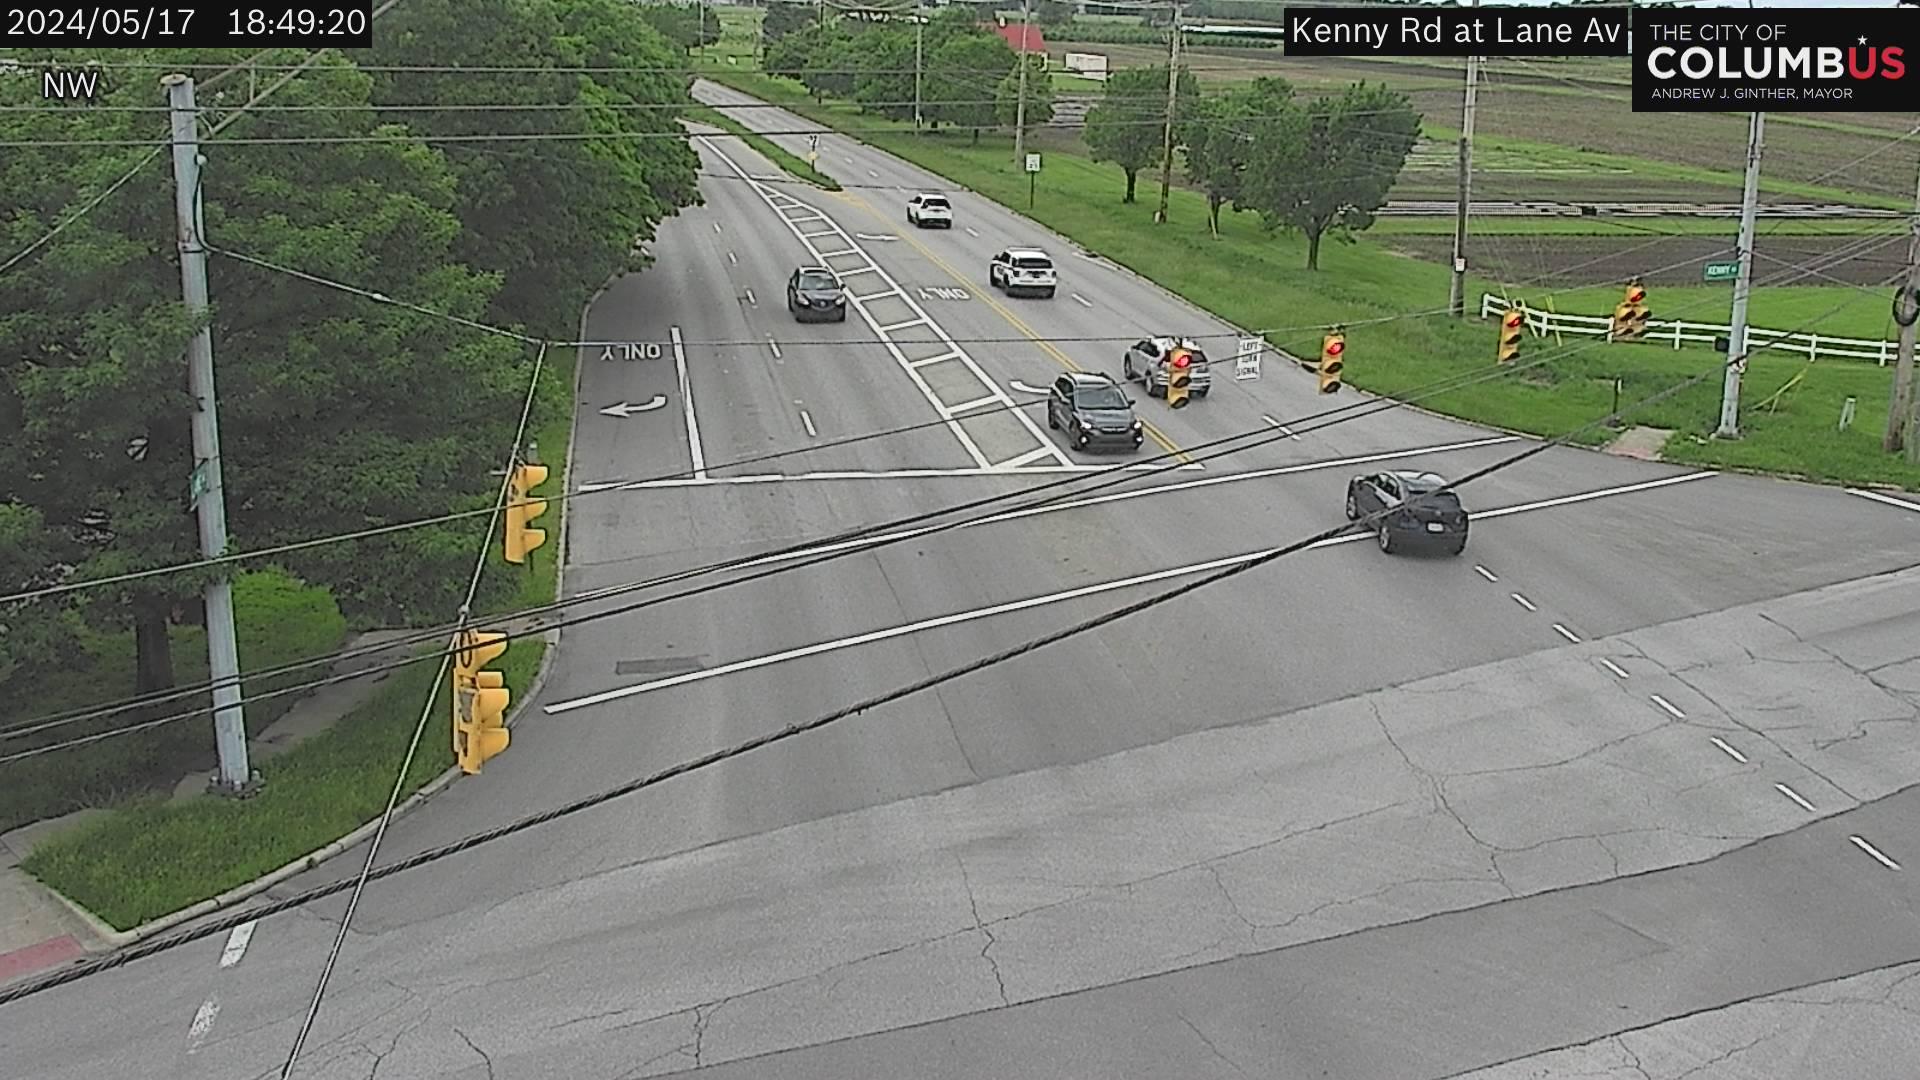 Traffic Cam Columbus: City of - Lane Ave at Kenny Rd